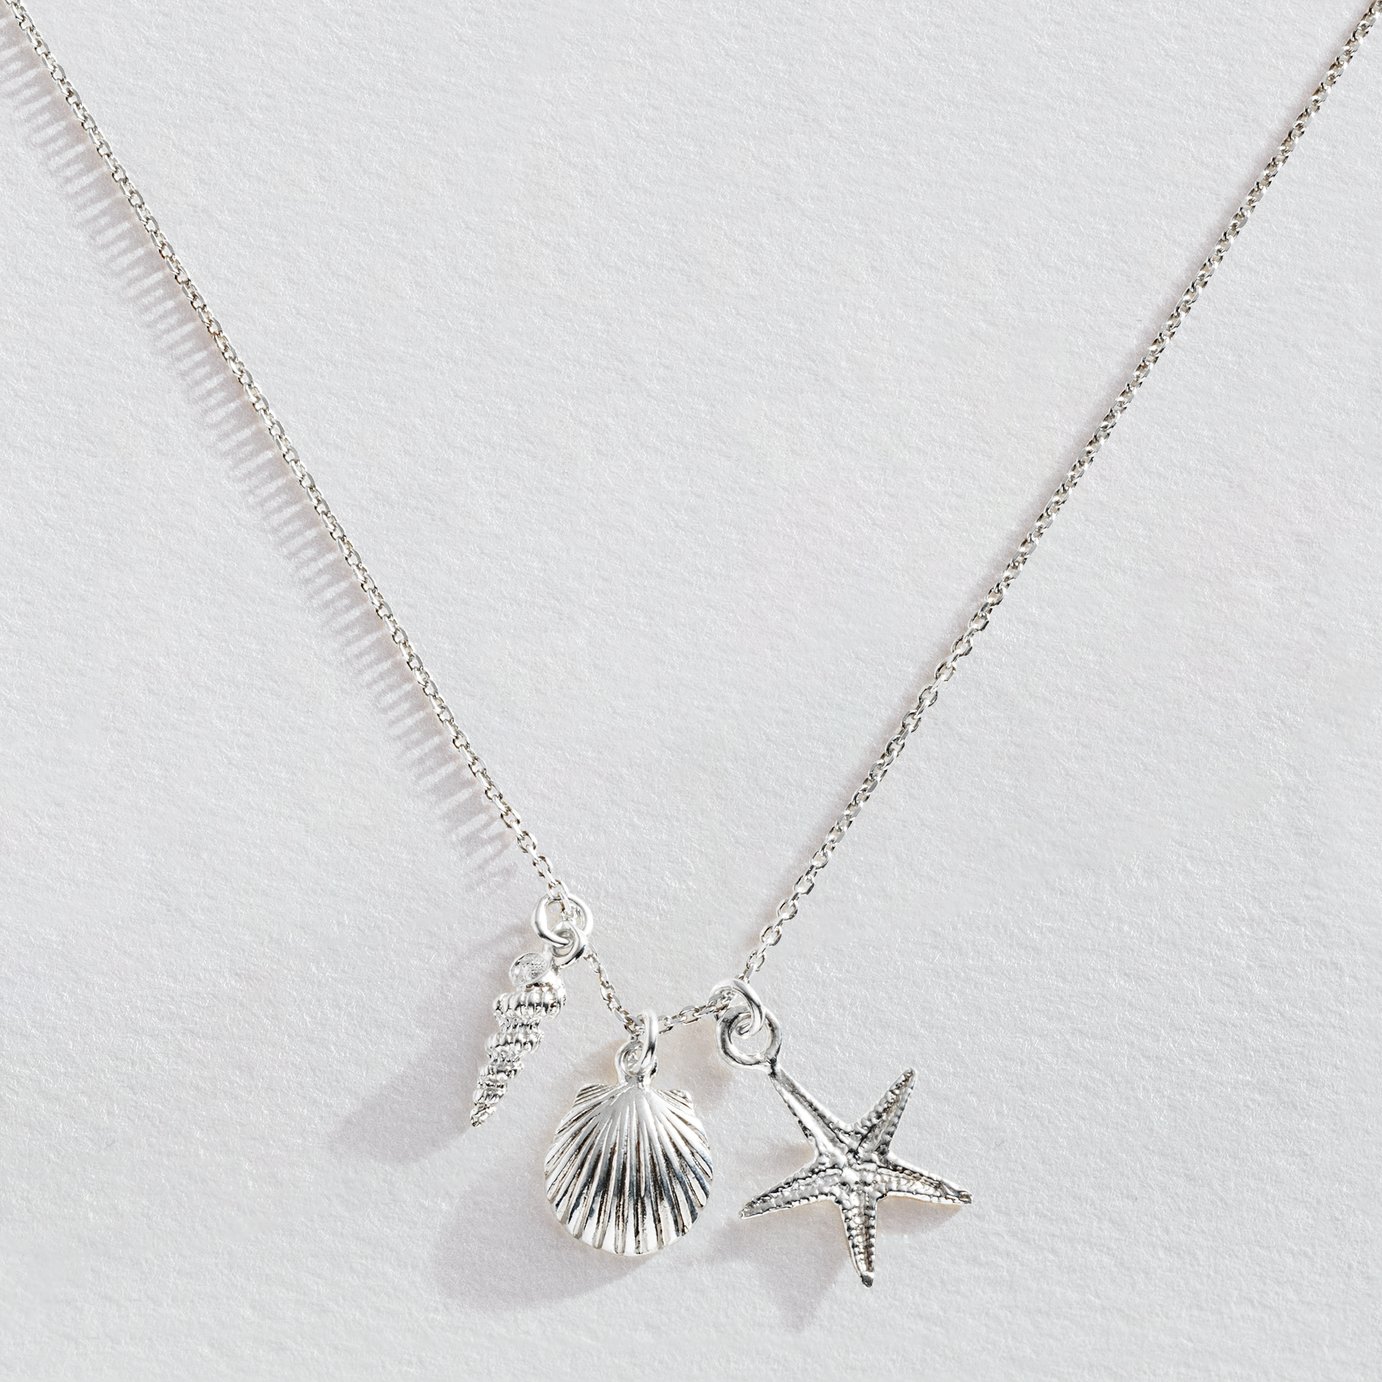 Revere Sterling Silver Shell and Sea Star Charm Necklace